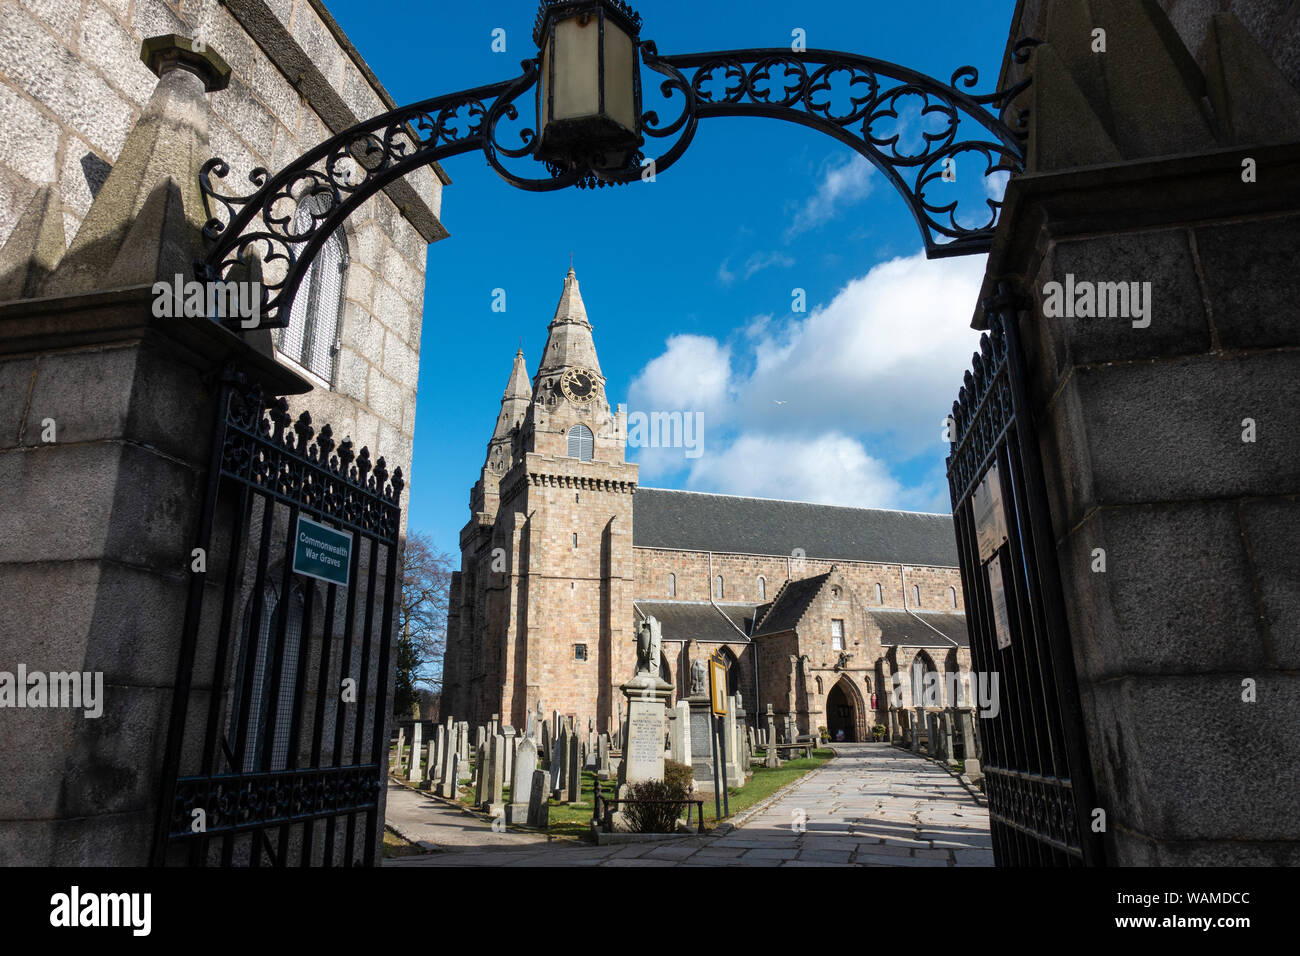 View through entrance gates of St. Machar’s Cathedral, Old Aberdeen, Aberdeen, Scotland, UK Stock Photo